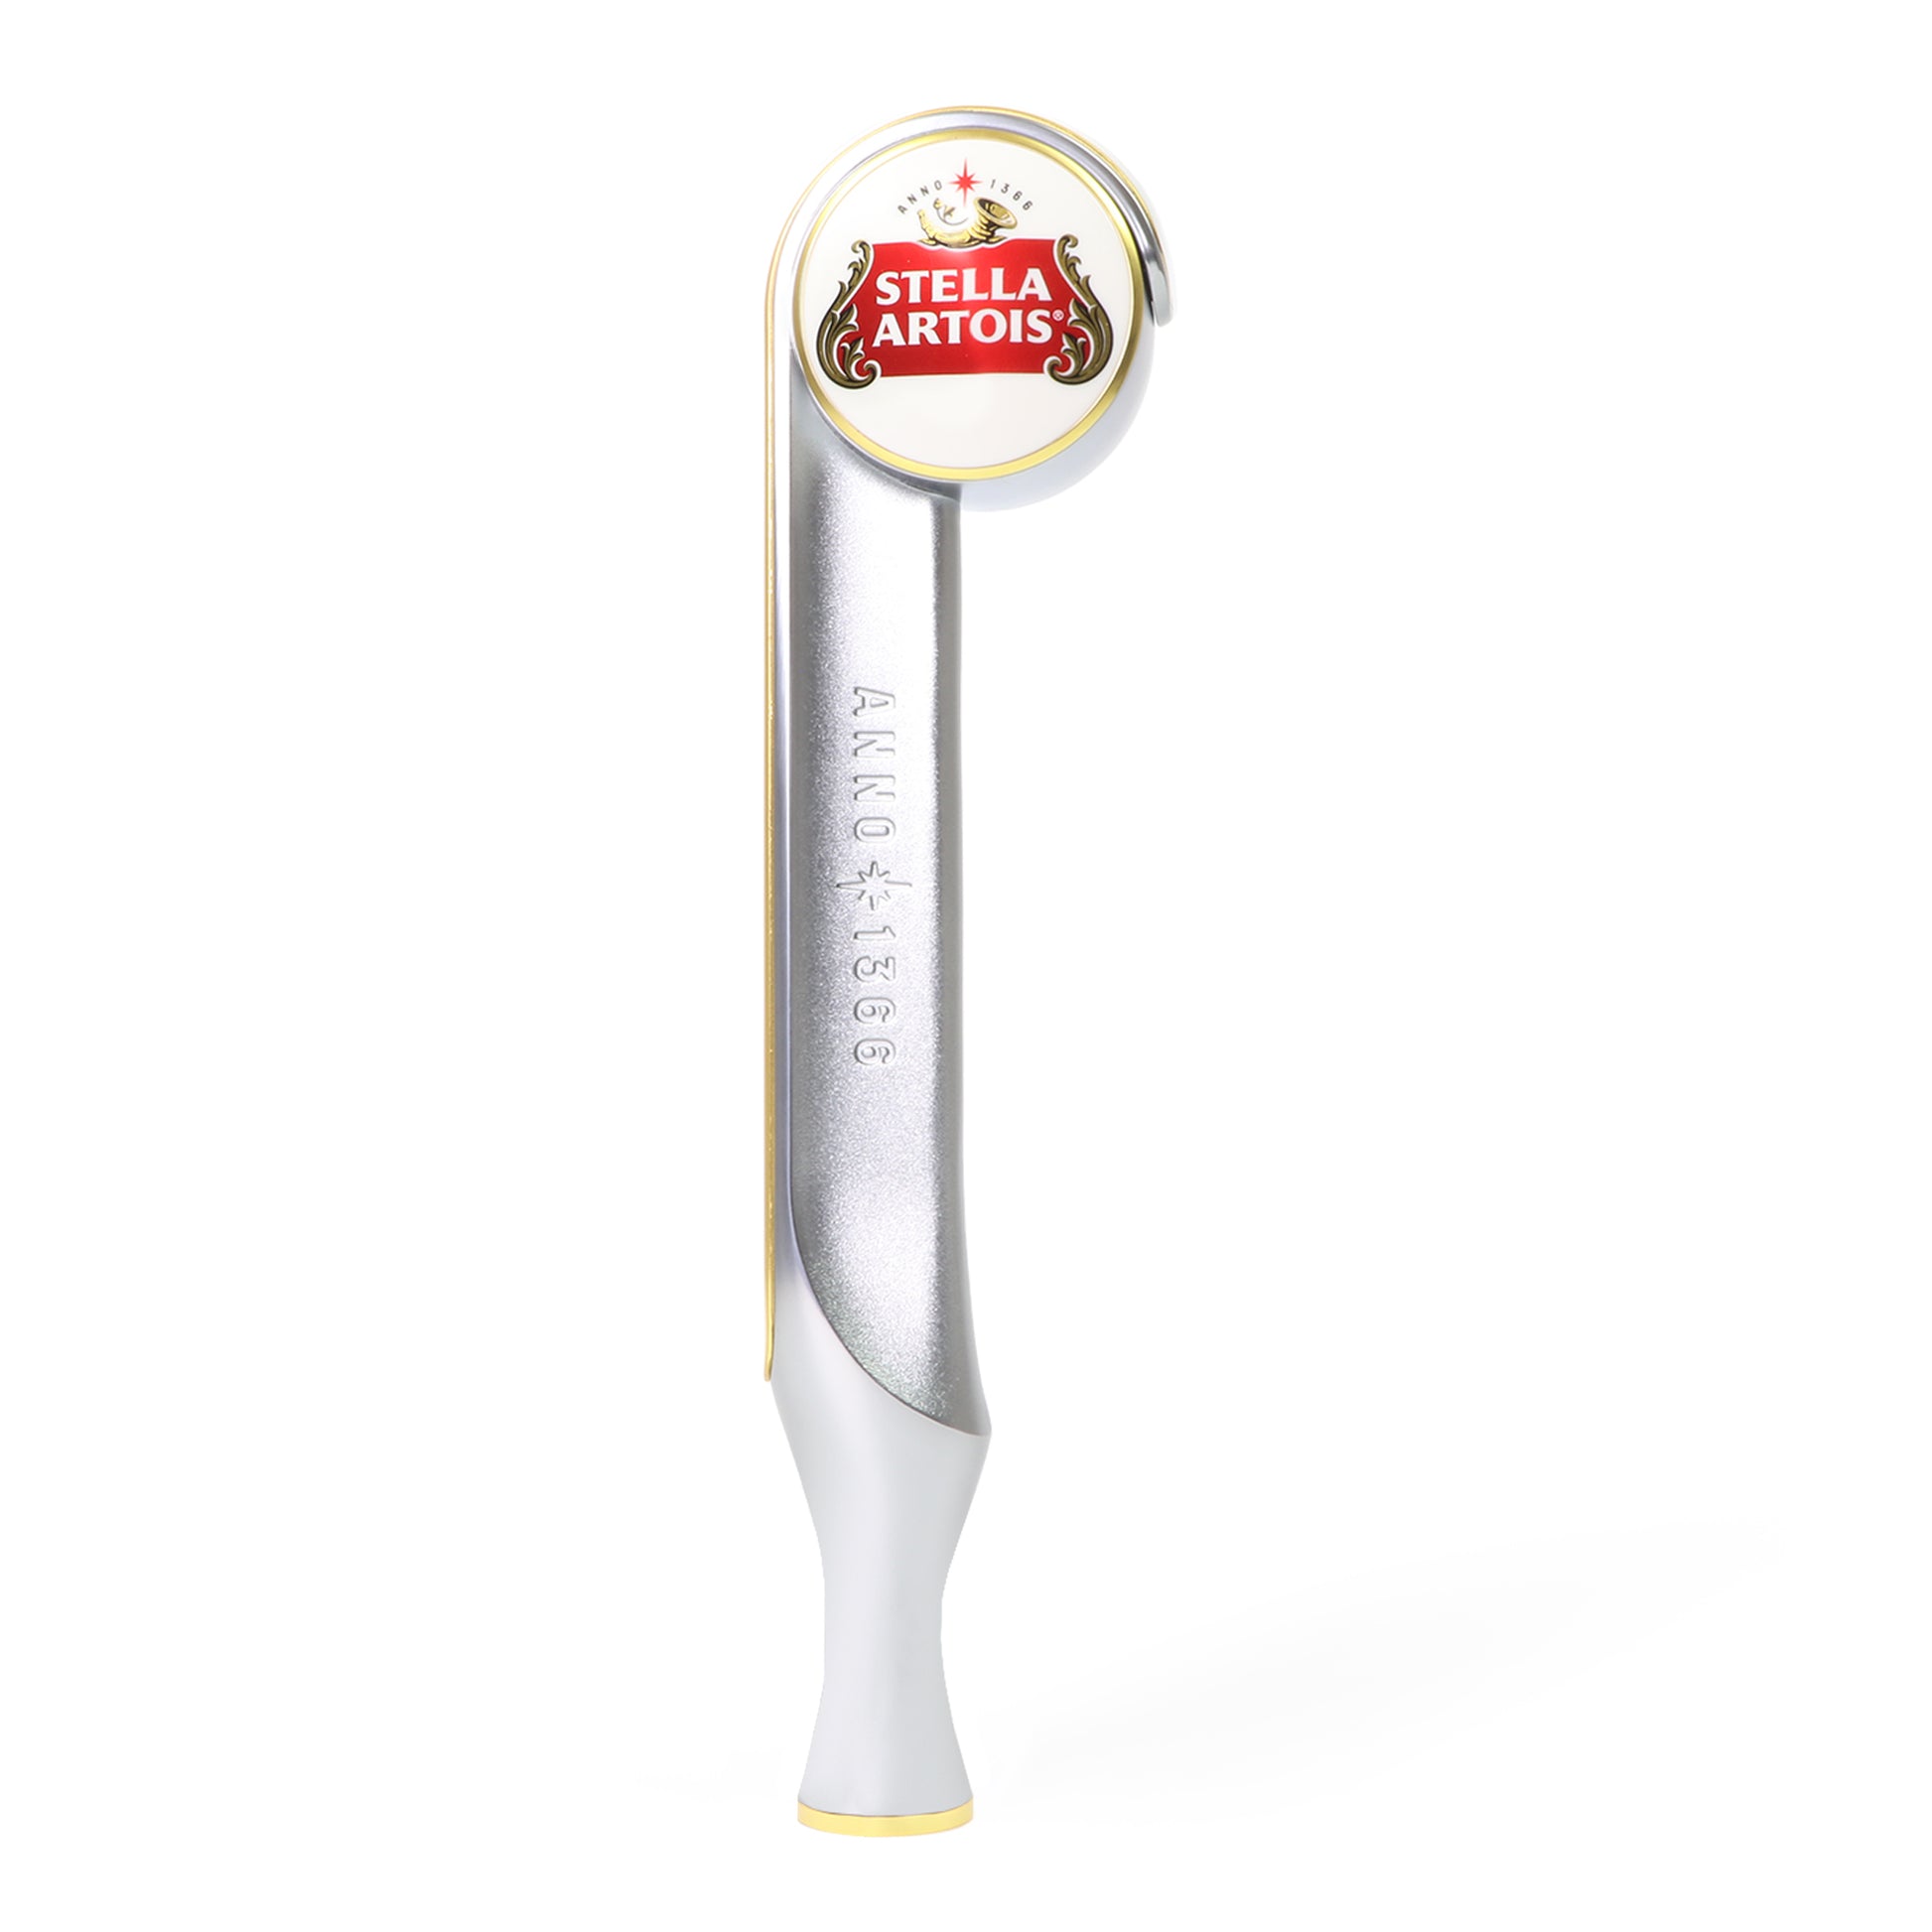 Side View of whole Stella Artois Tap Handle